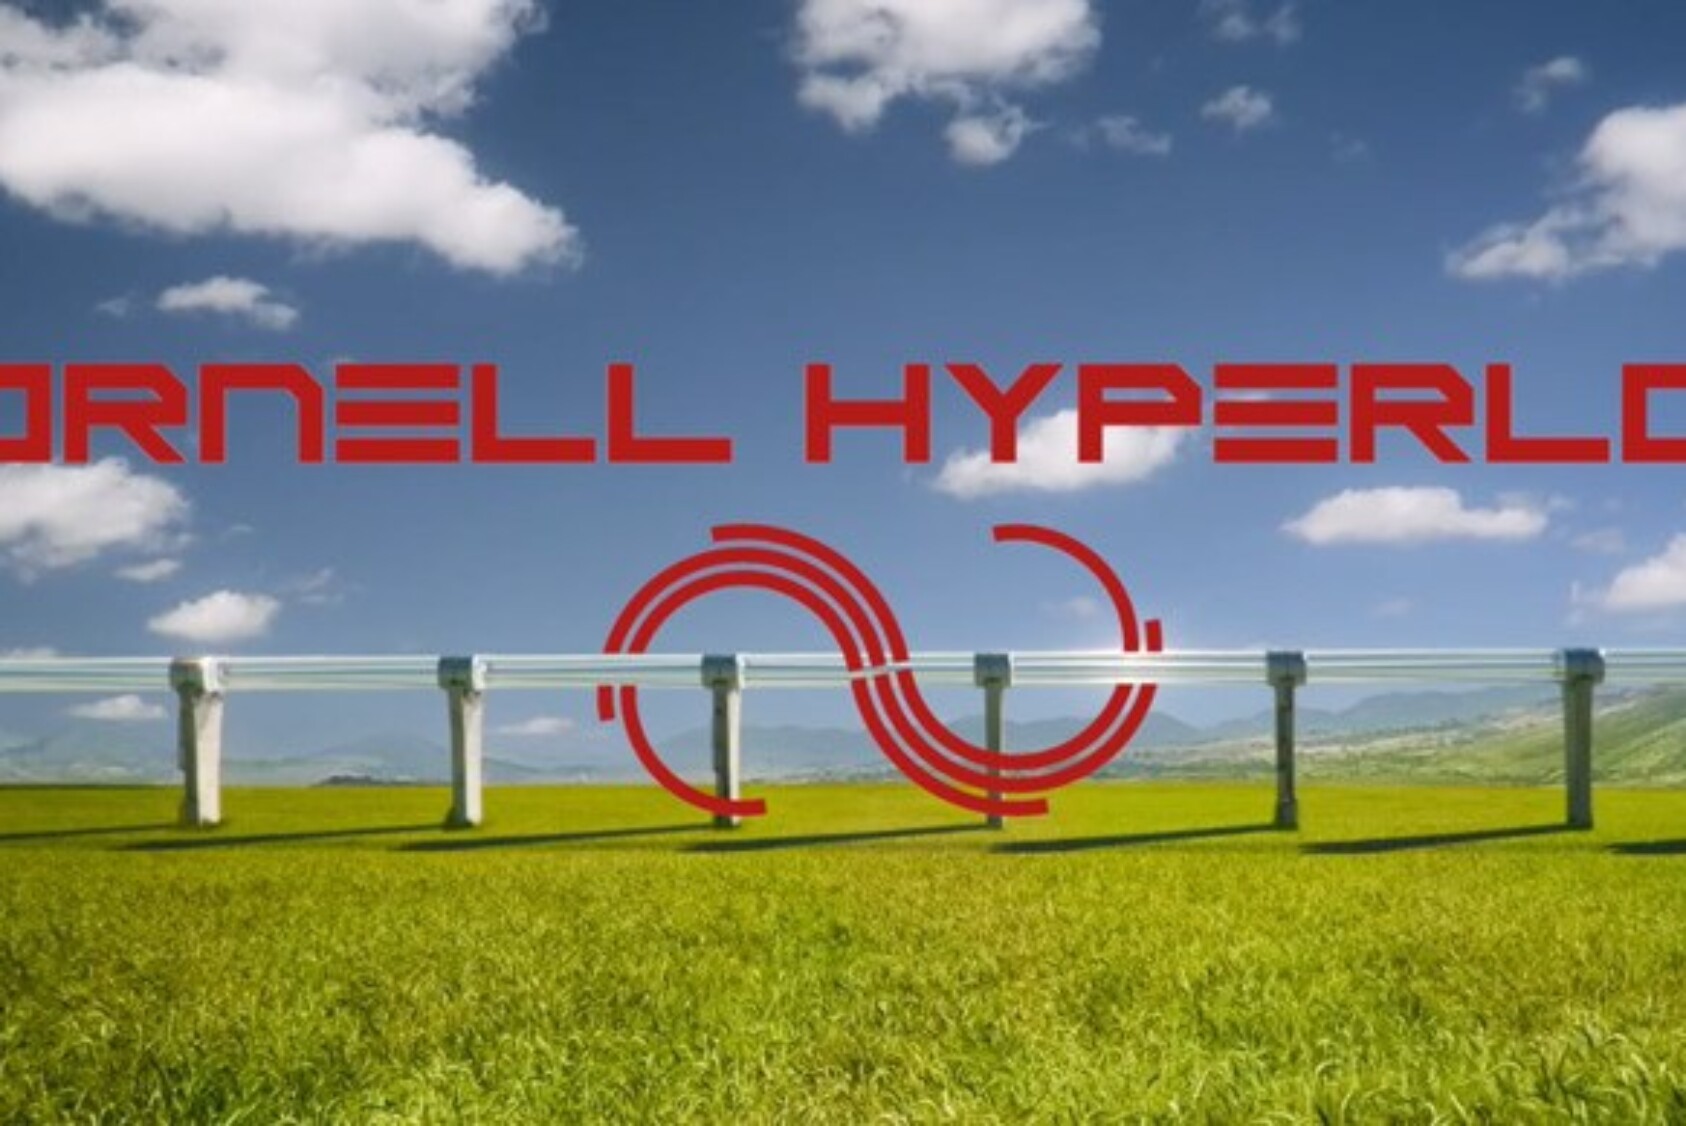 Hyperloop is an Elon Musk-proposed mode of passenger and freight transportation—a frictionless, vacuum-sealed tube system through which a pod travels at speeds exceeding 600 mph. “Hyperloop is a game changer and a glimpse into the future of efficient transportation. The opportunity to compete at leading conferences will provide our team with invaluable experience and will further our contributions to the exciting research being done.” —Cameron Robinson ’24, team manager